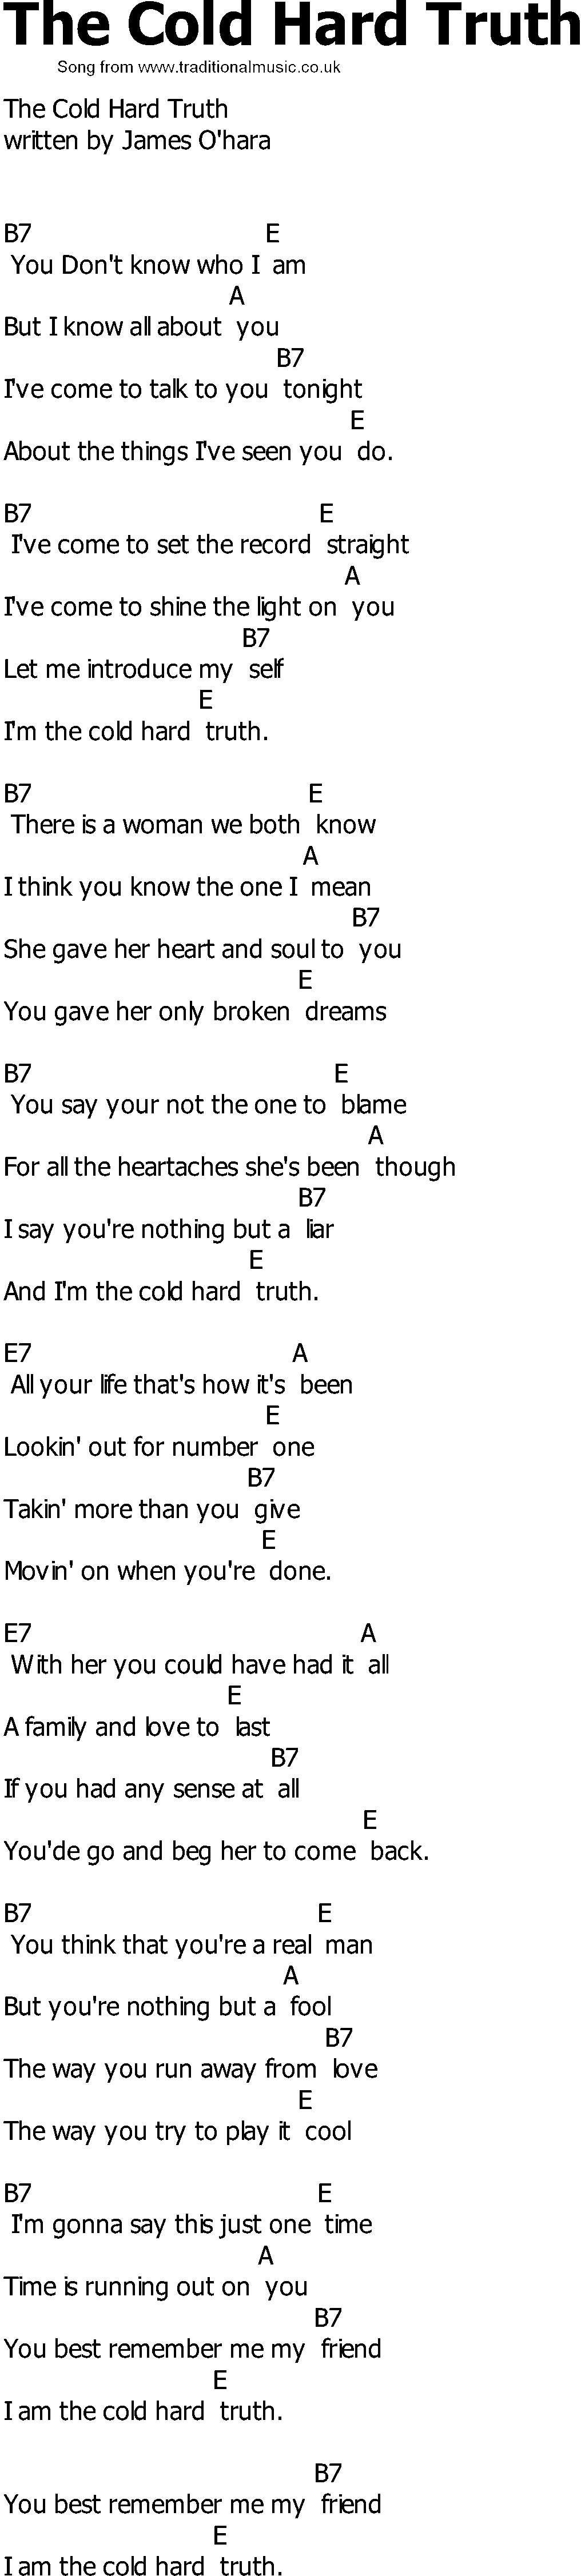 Old Country song lyrics with chords - The Cold Hard Truth